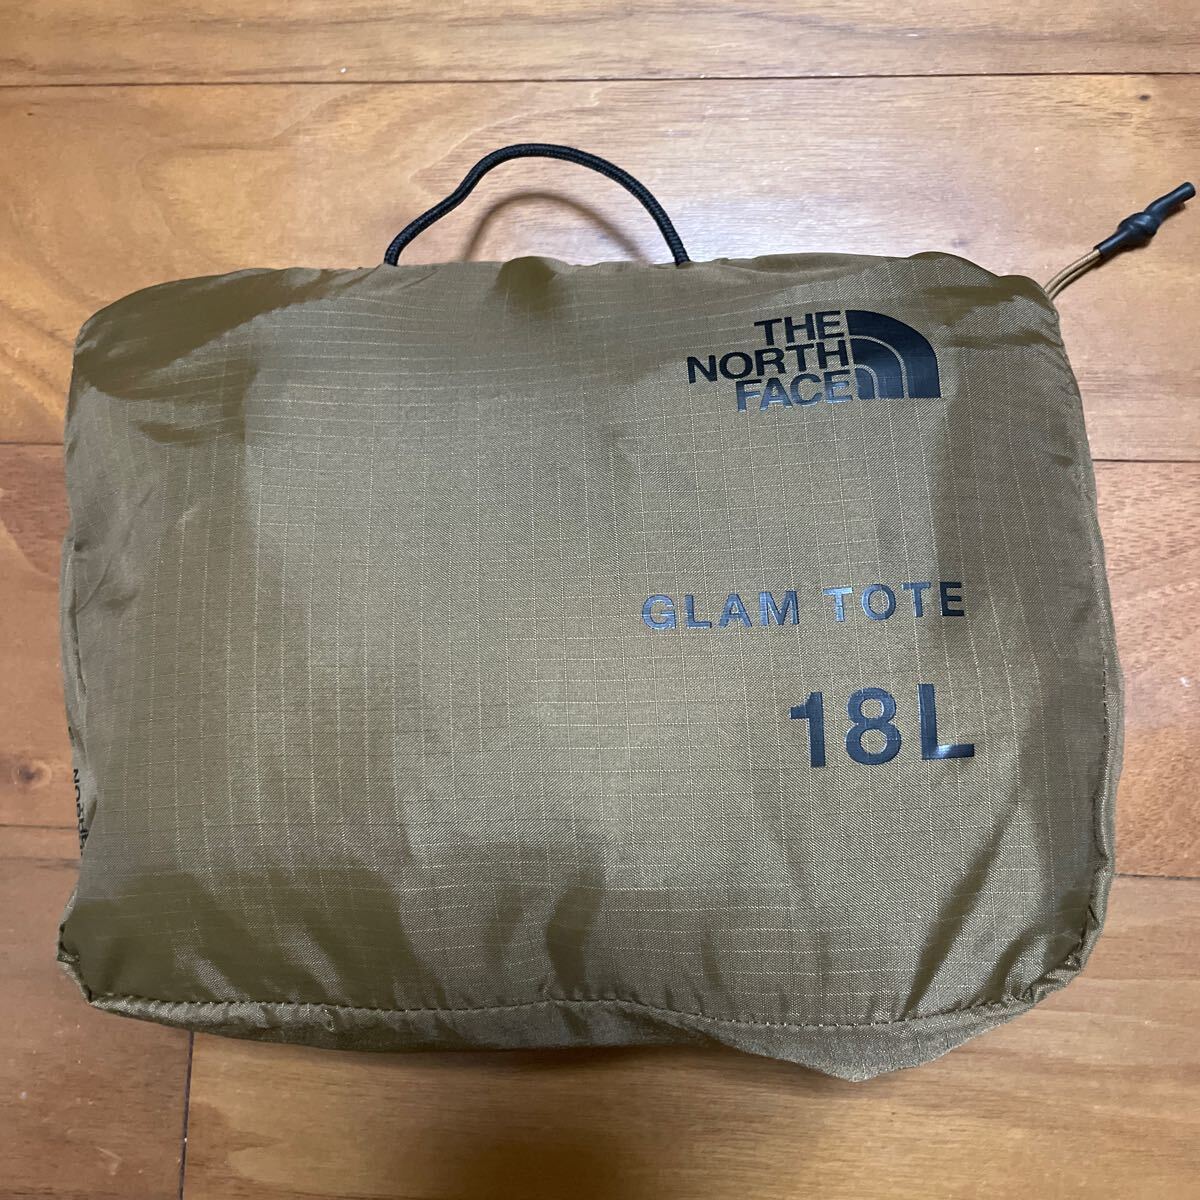 NORTH FACE GLAM TOTE 18L 2wayバックパック の画像6